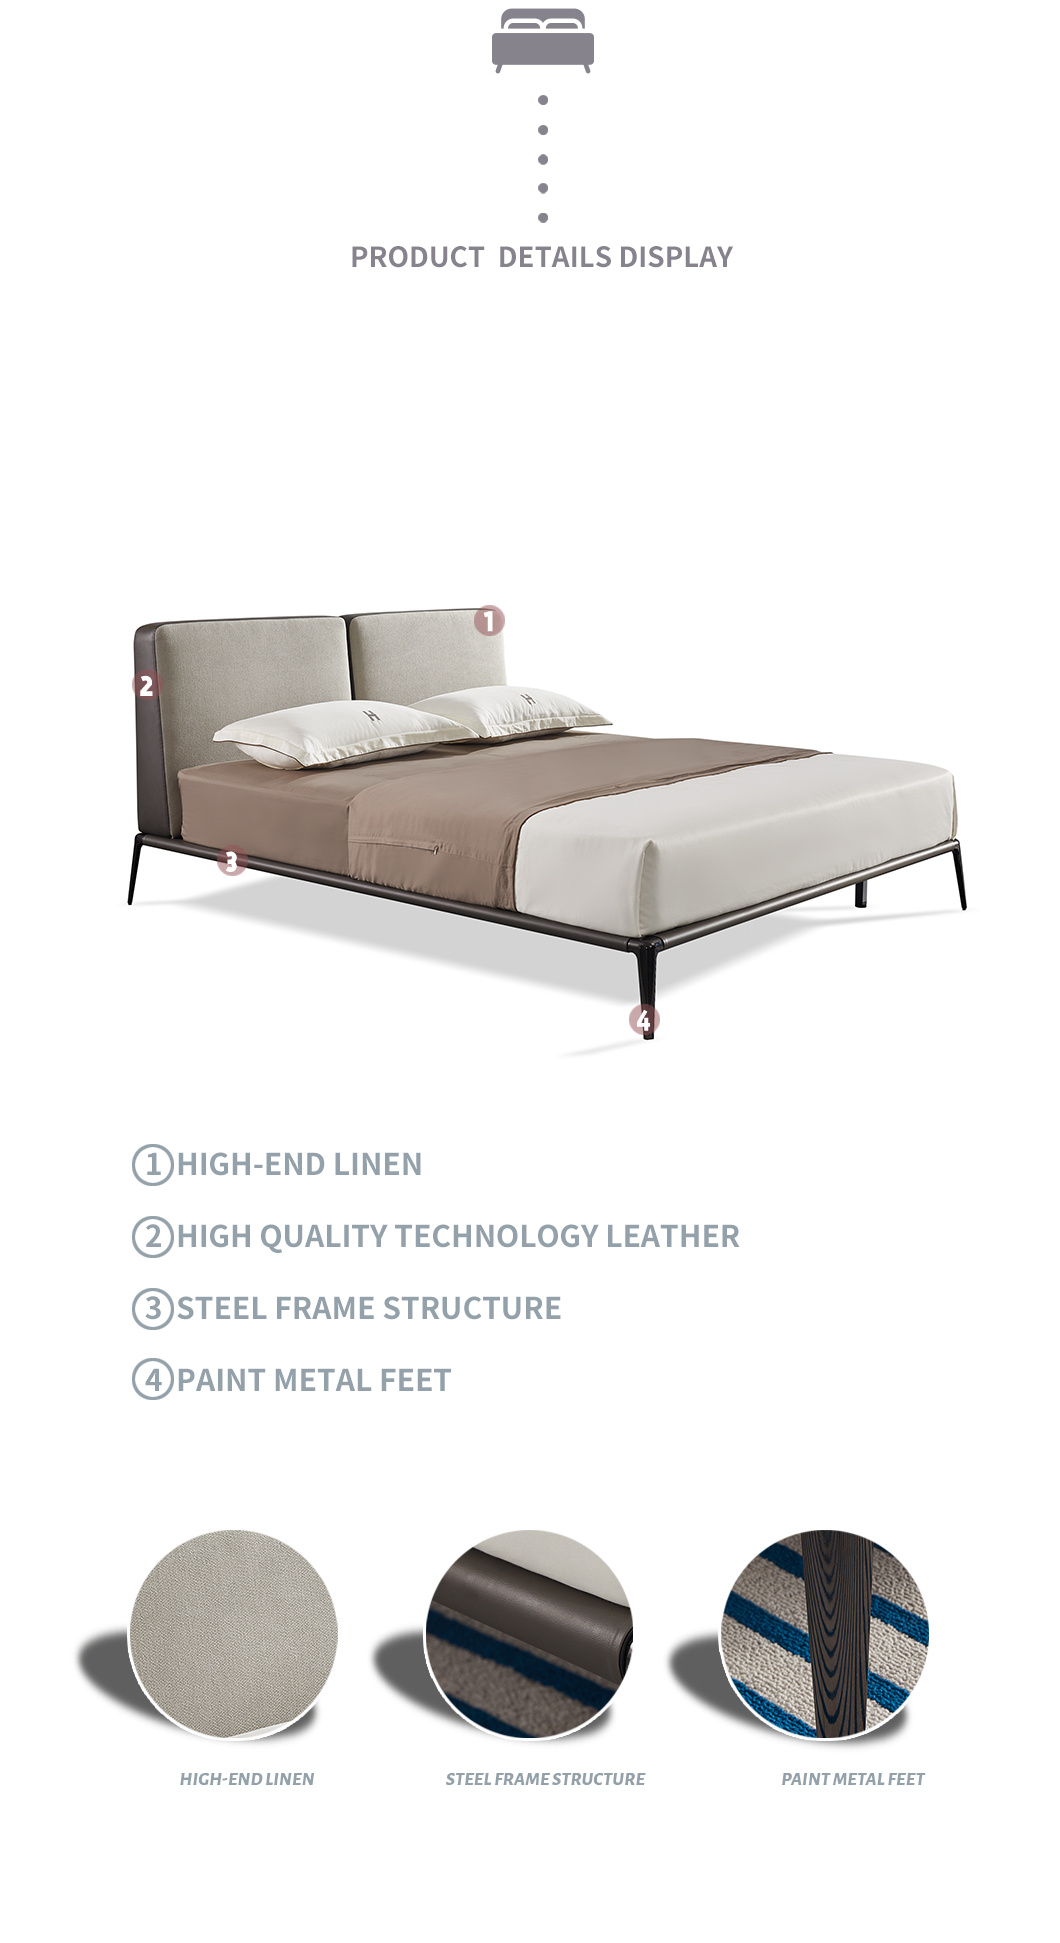 2022 New Design High Quality Technology Leather Bed Bedroom Furniture